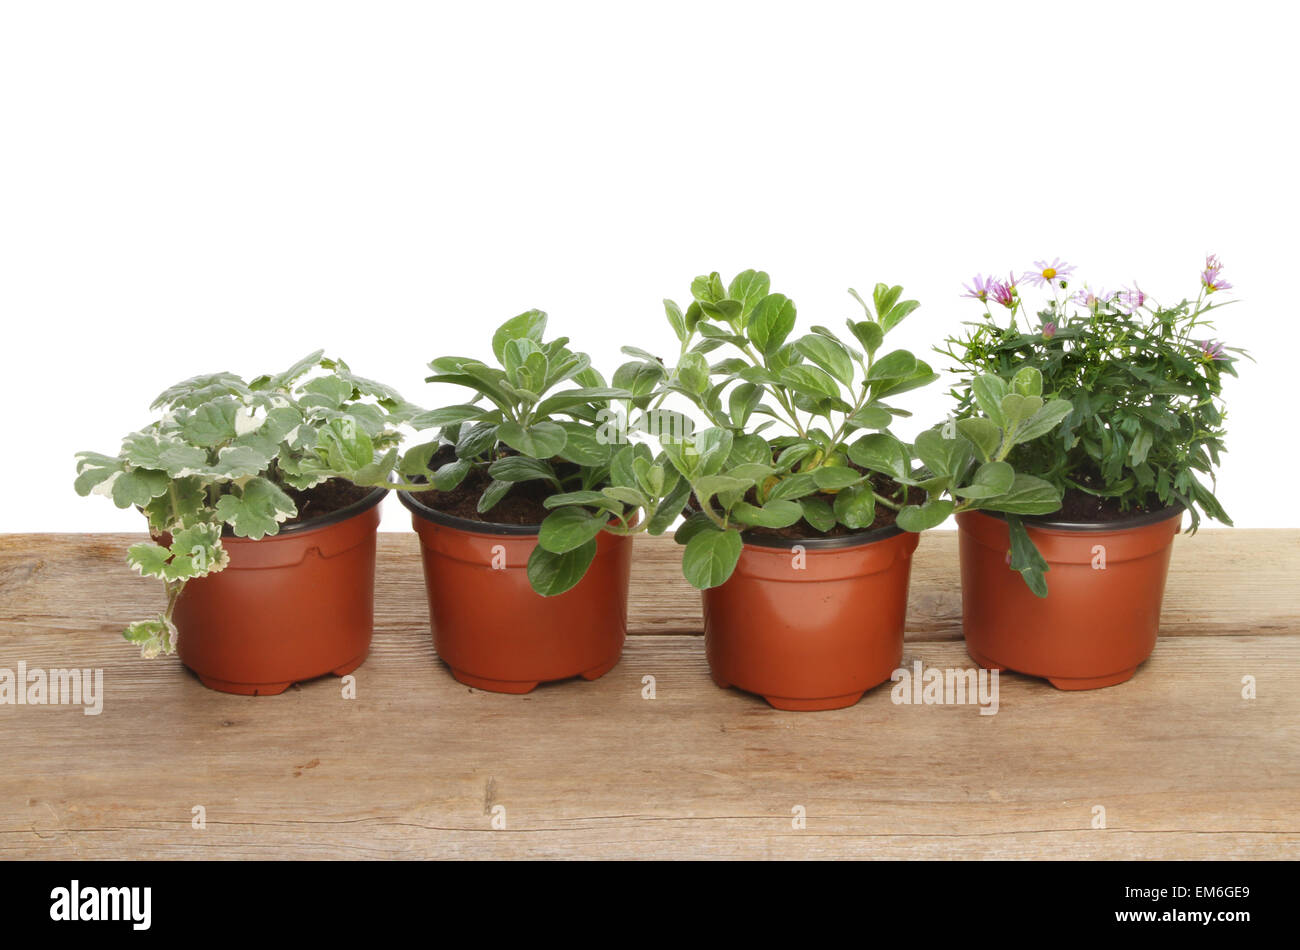 Bedding plants in pots on a wooden board against a white background Stock Photo